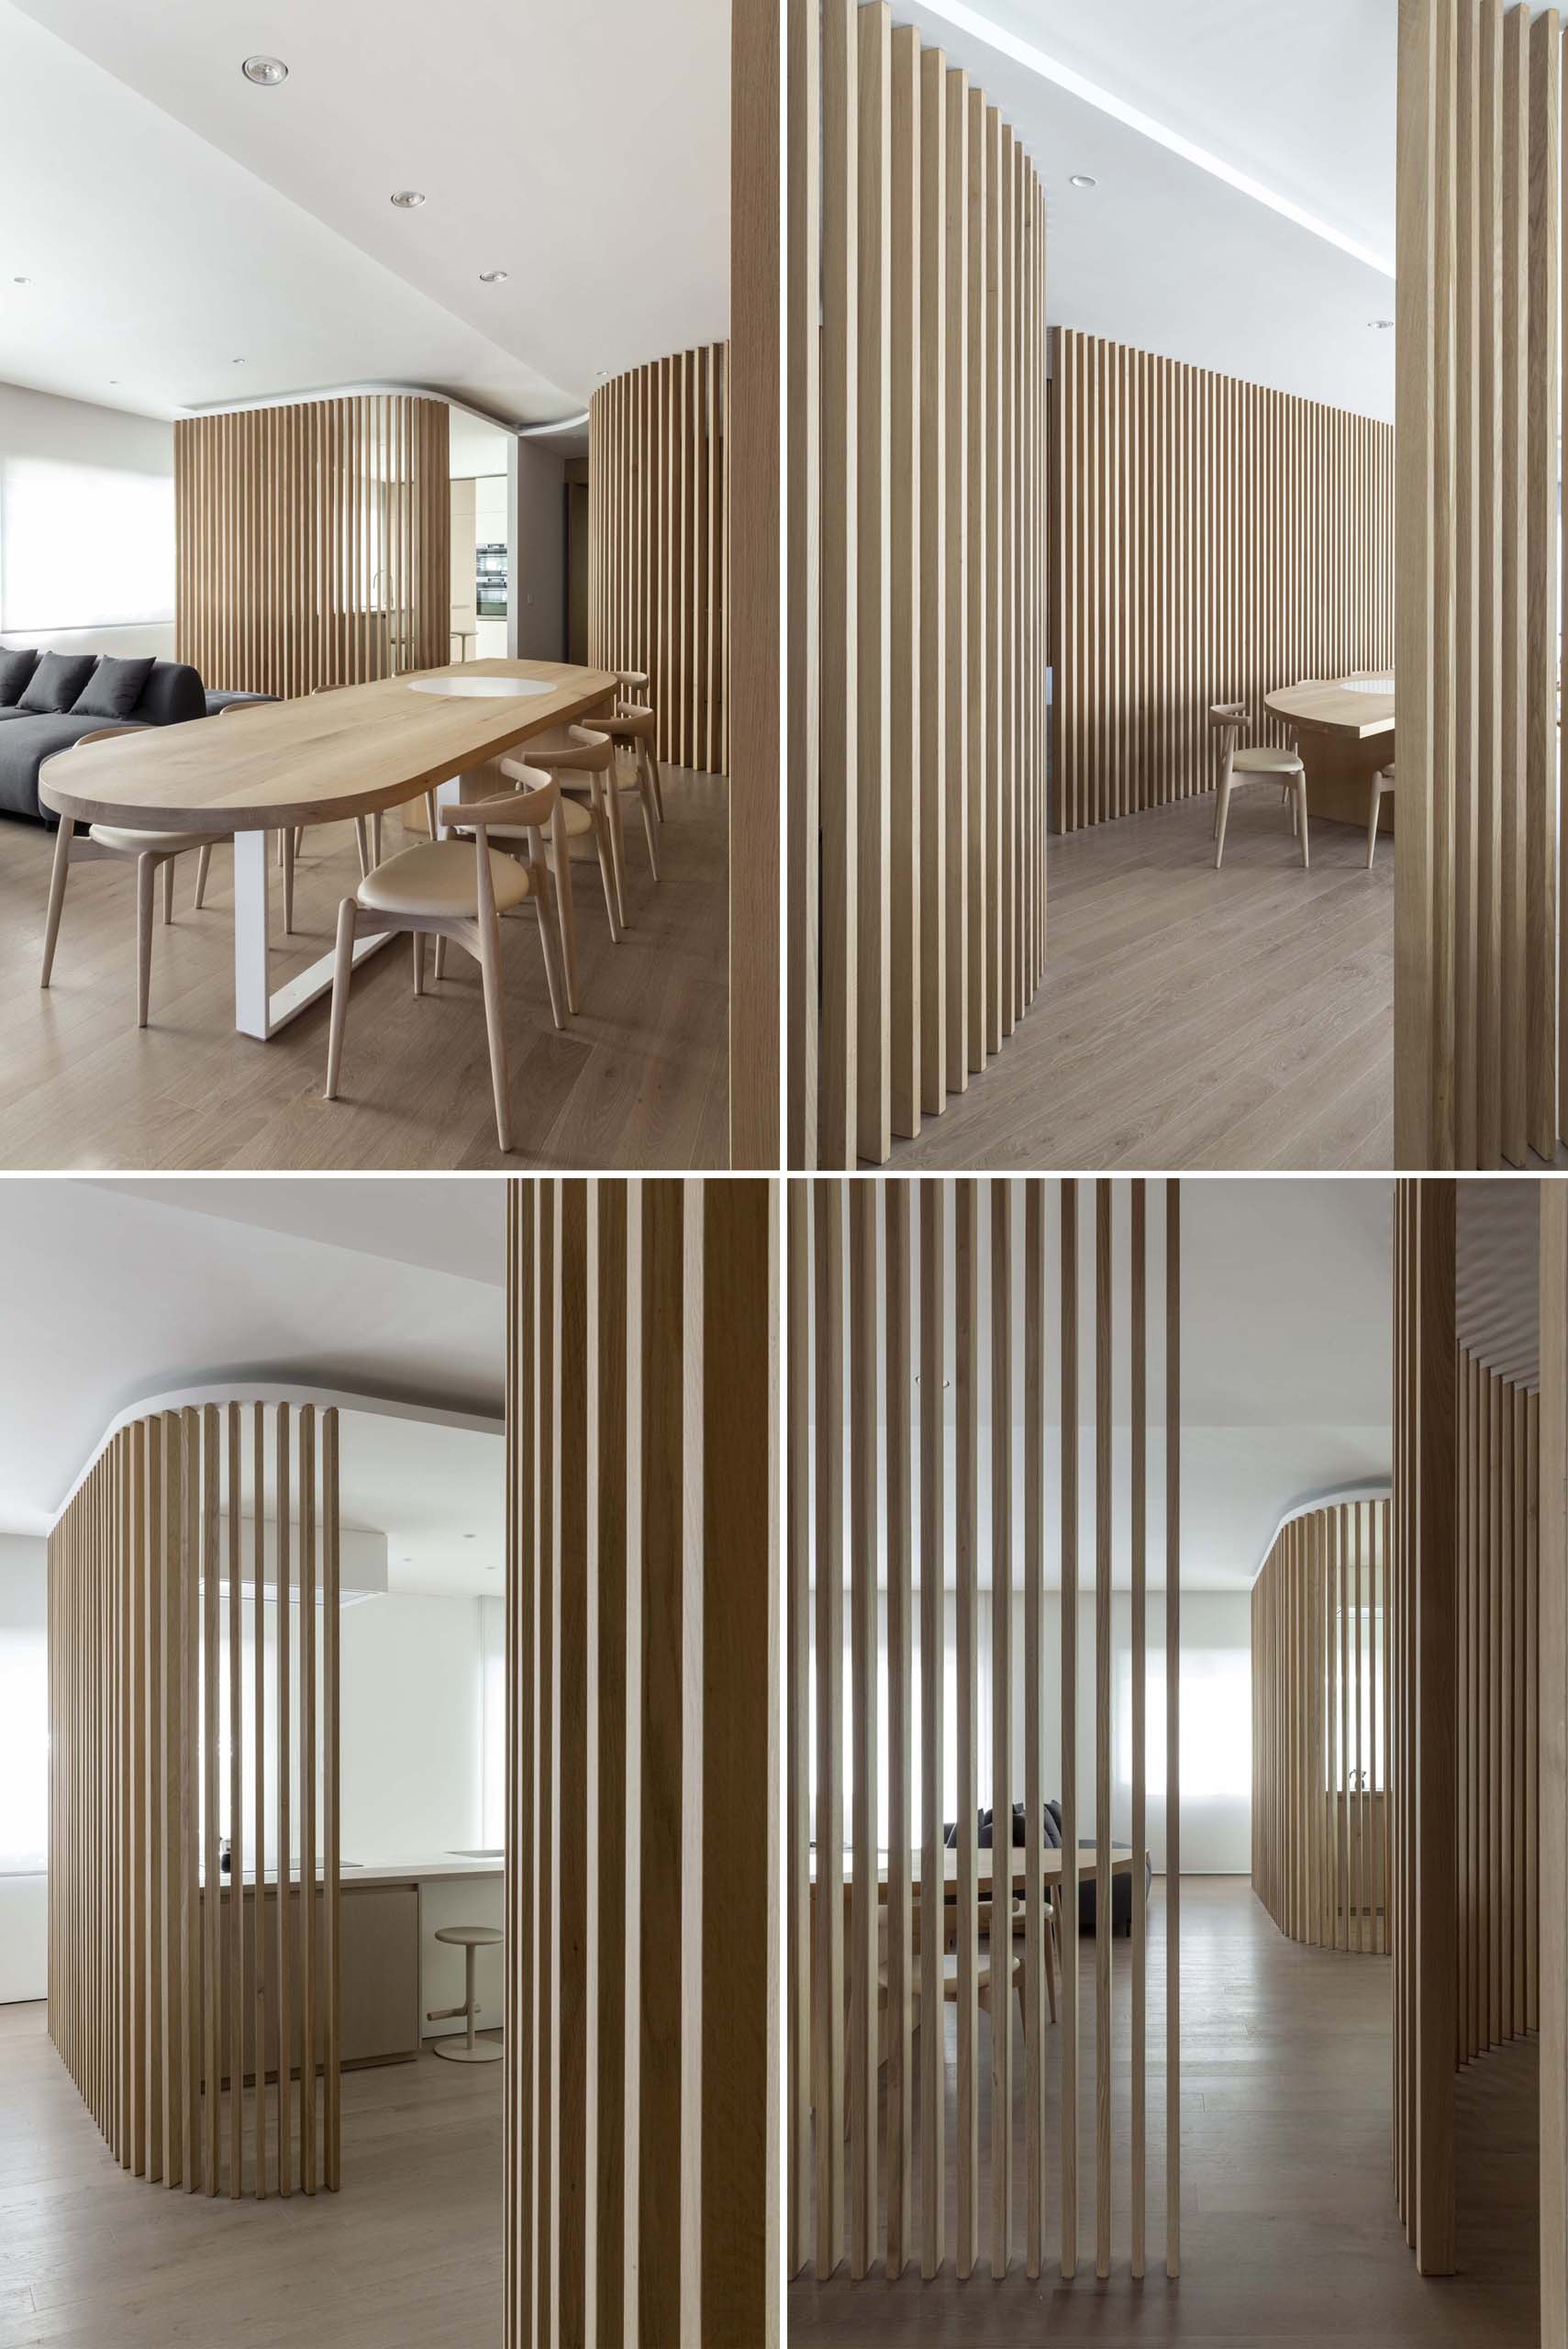 A modern apartment uses curved oak partitions to separate the kitchen from the living and dining room.